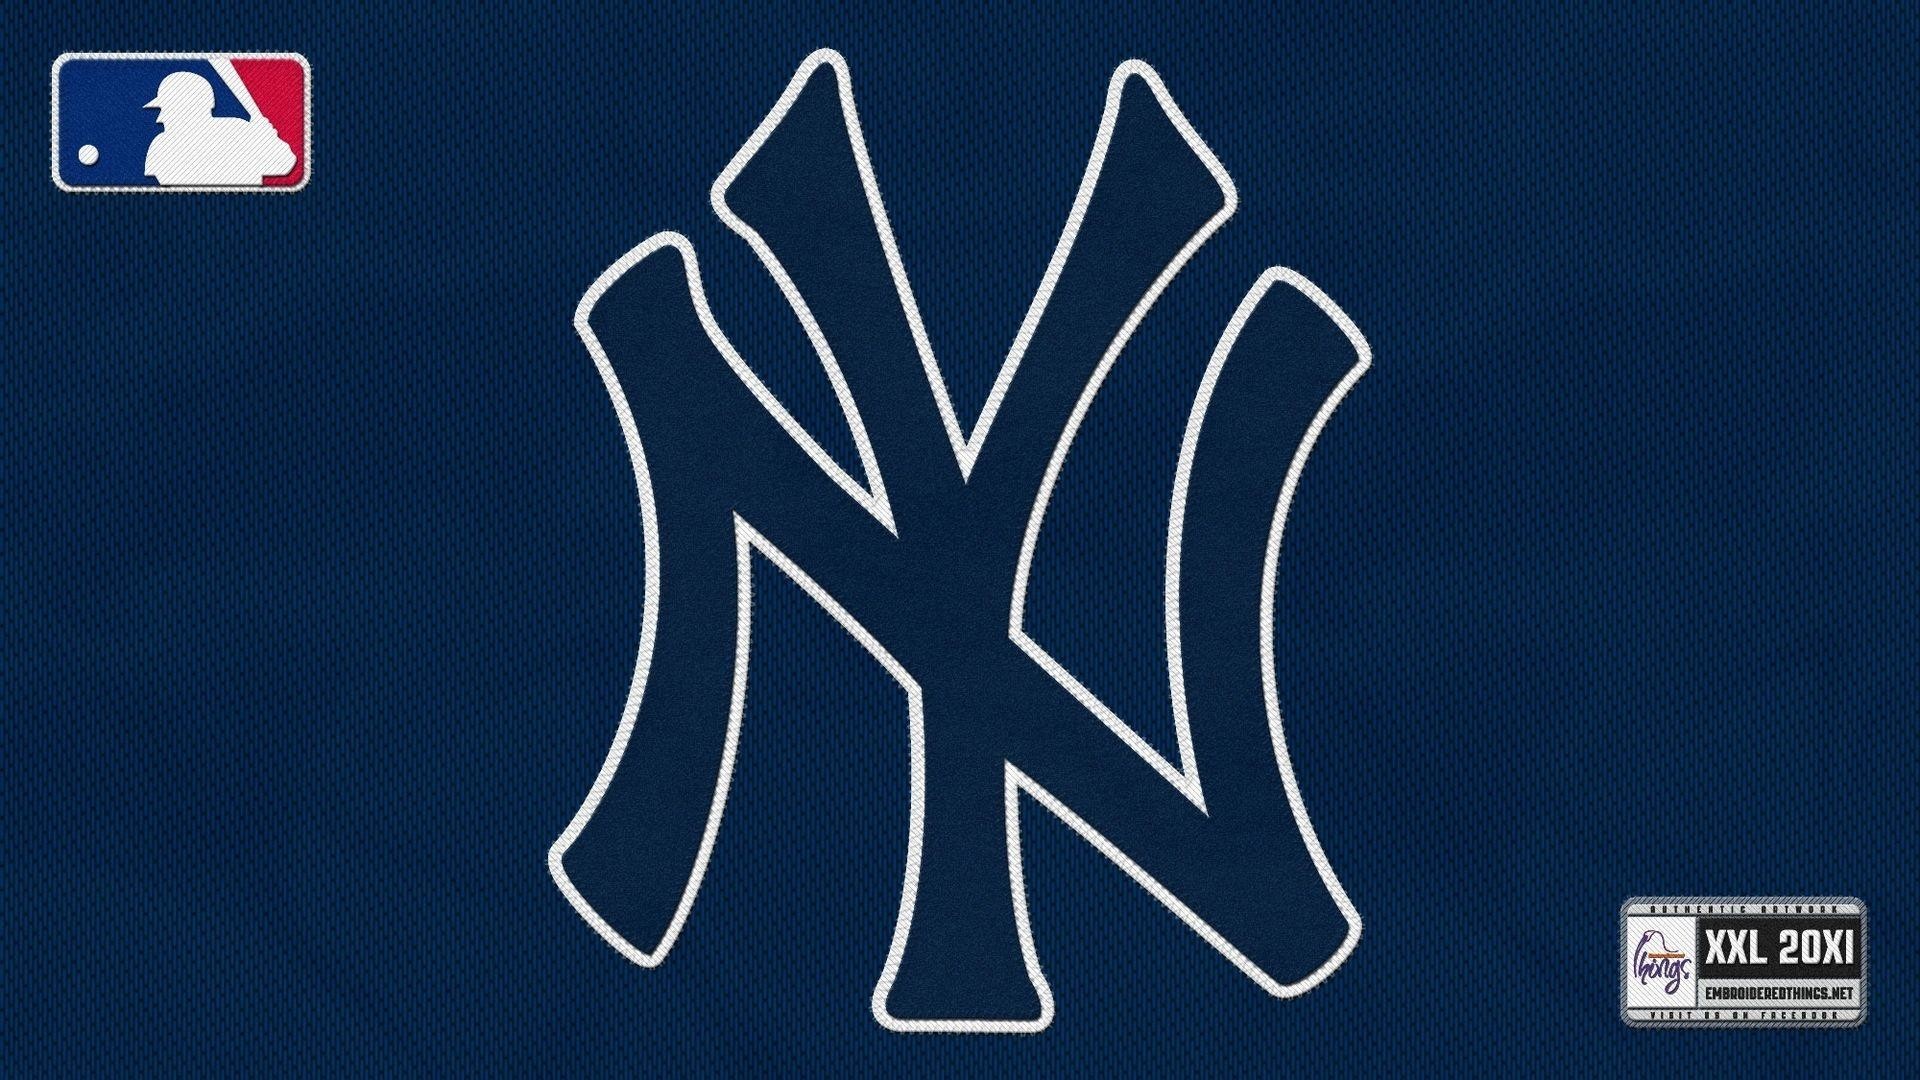 Yankees wallpaper by AlamRodriguez  Download on ZEDGE  4a88